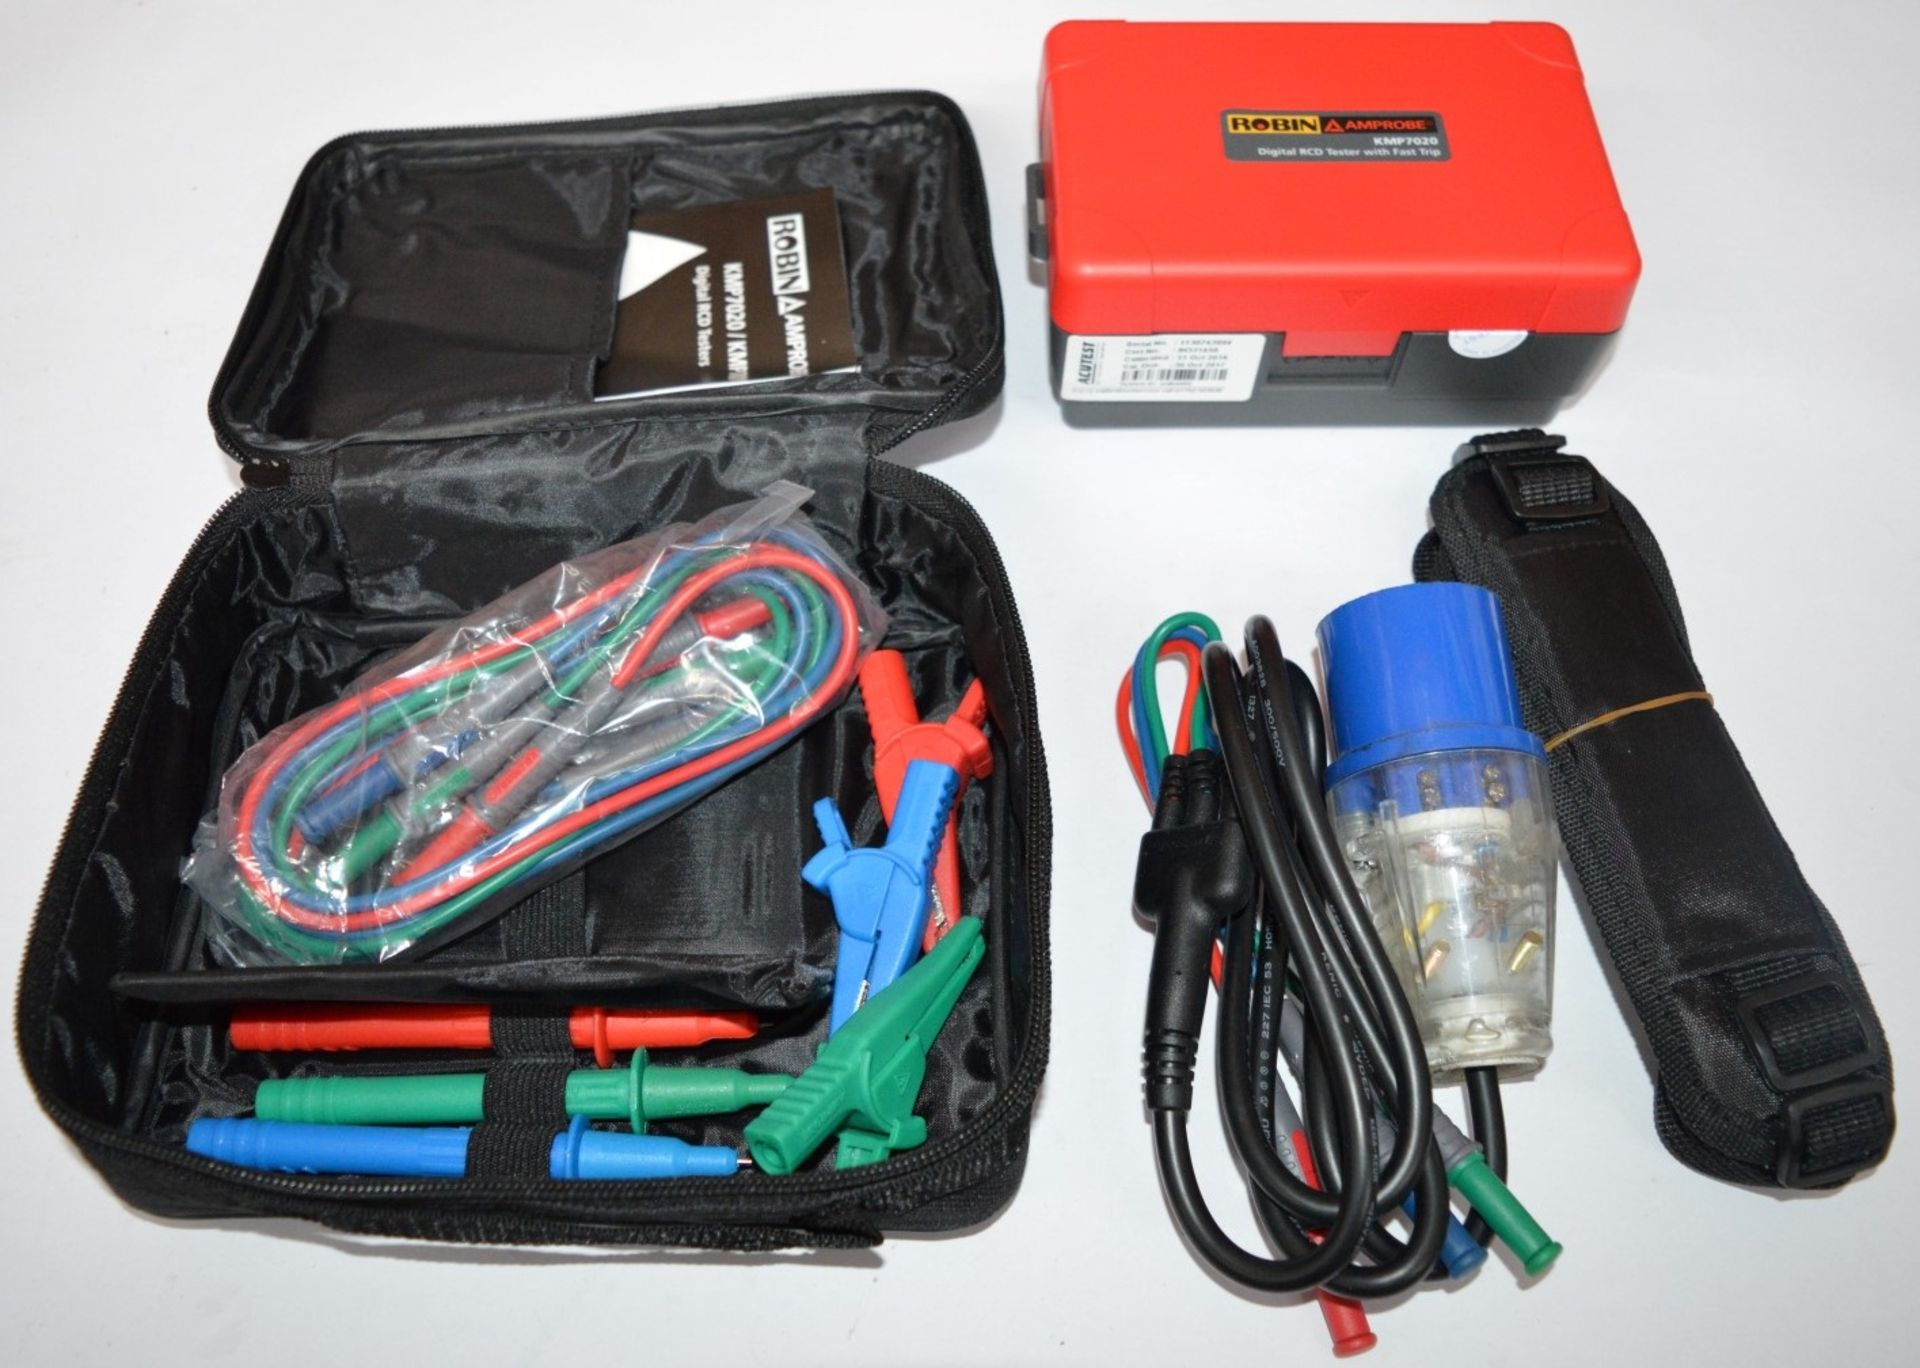 1 x Robin Amprobe Digital RCD Tester Wth Fast Trip - Model KMP7020 - Boxed With All Accessories - - Image 3 of 12